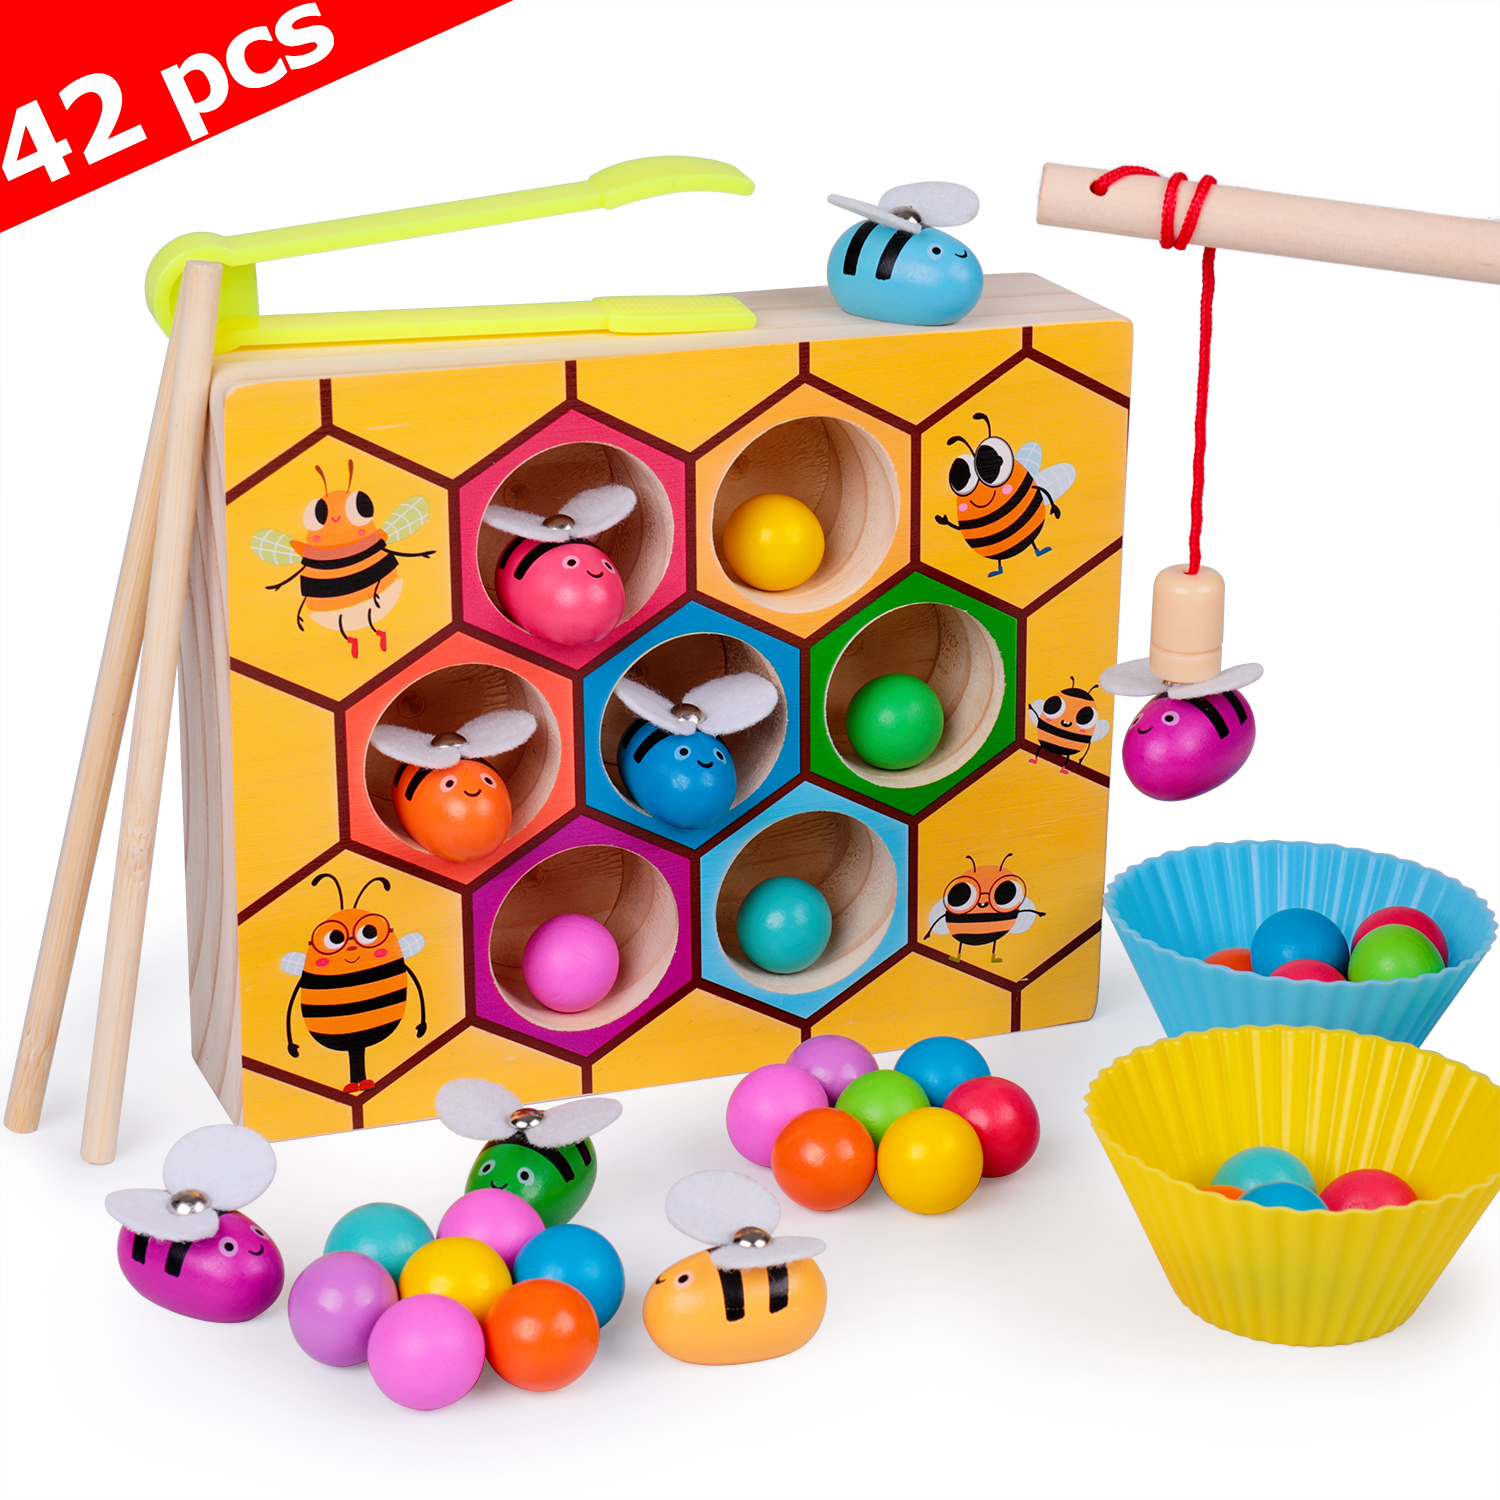 Montessori Wooden Color Sorting Puzzle Early Learning Preschool Educational Kids Toys for 2 3 4 Years Old Boys and Girls Gift Toddler Fine Motor Skill Toy Clamp Bee to Hive Matching Game 